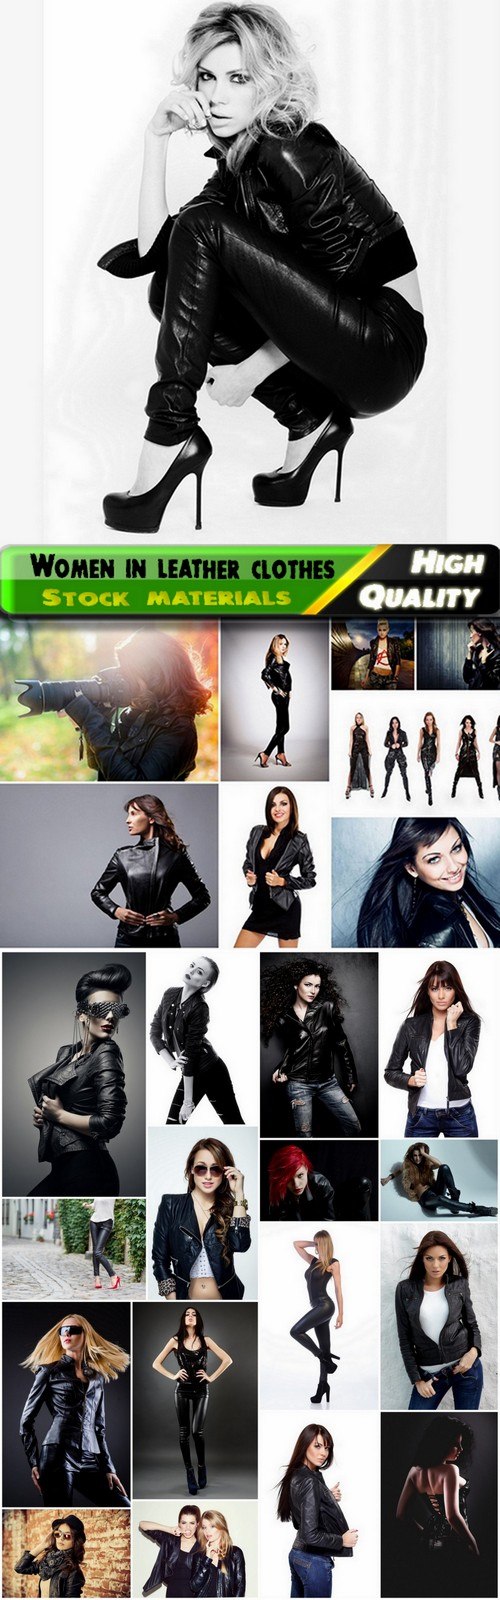 Fashionable girls and women in leather clothes - 25 HQ Jpg